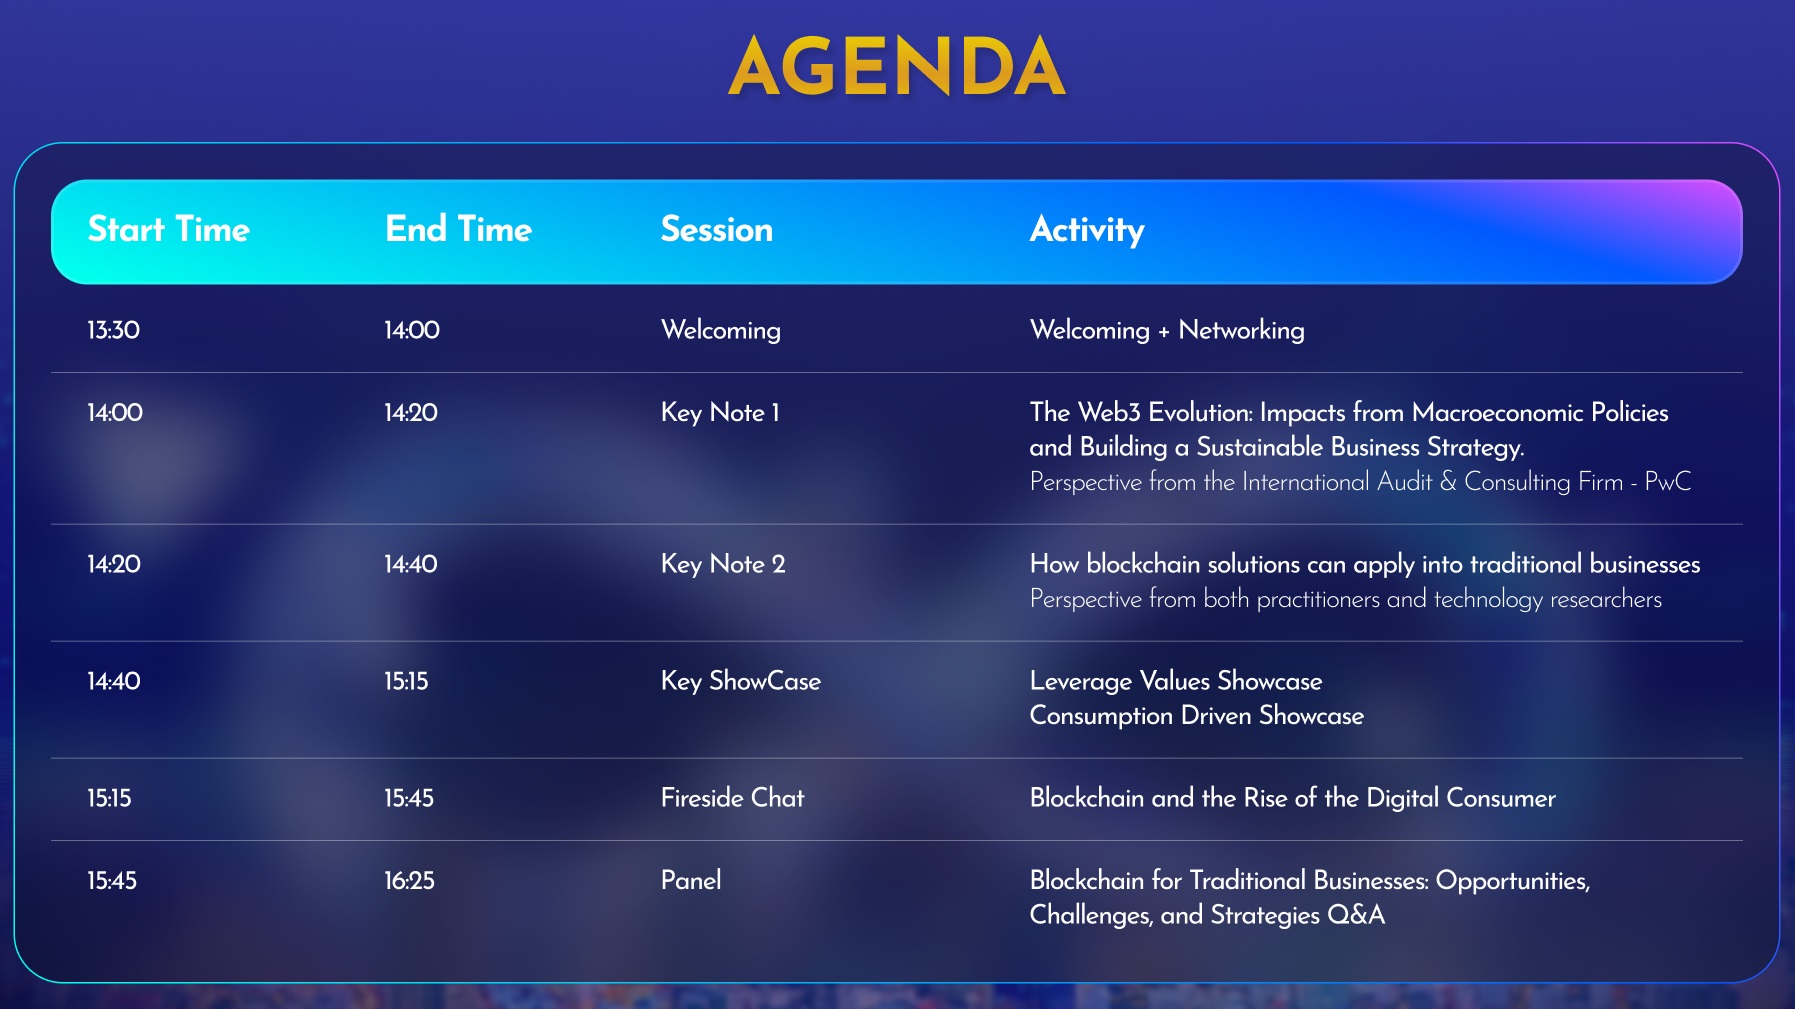 Agenda sự kiện :"“How can Brands leverage value and drive consumption with Web3 & Blockchain”